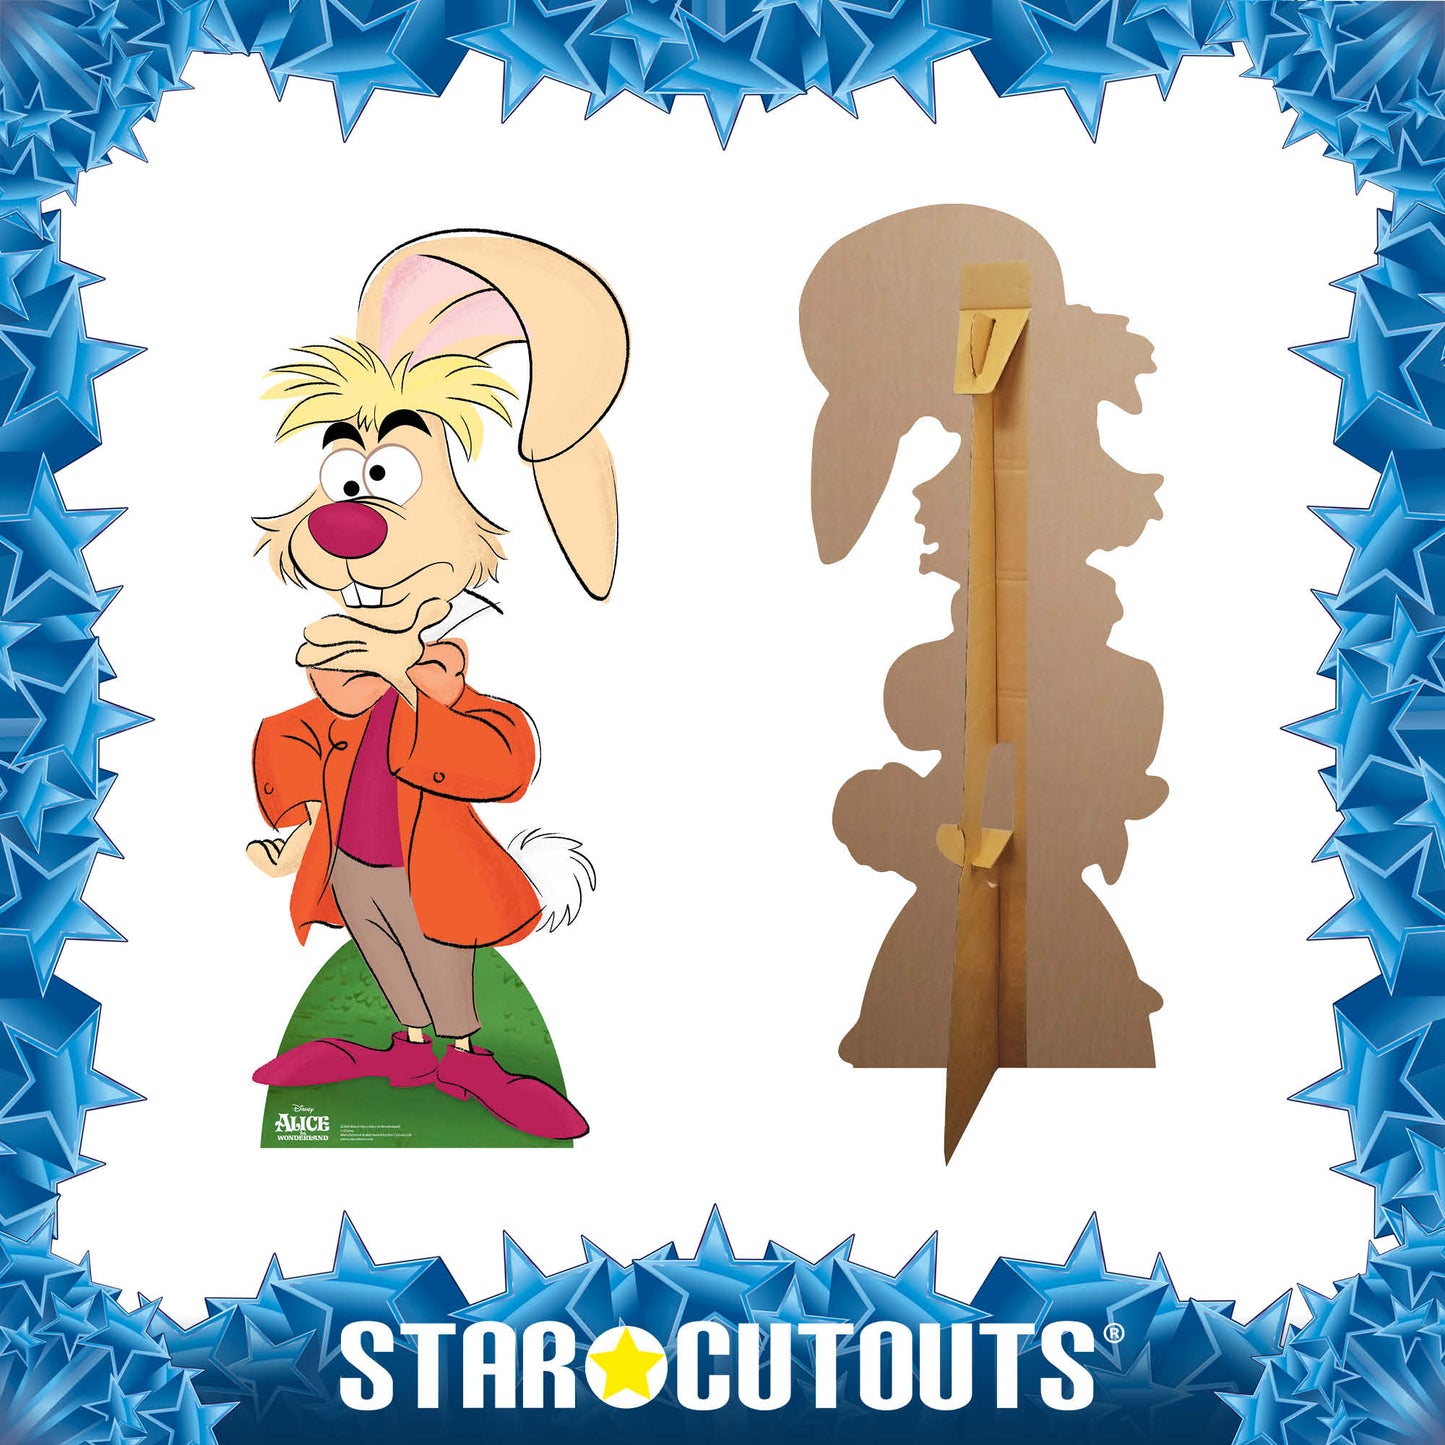 March Hare Classic Alice in Wonderland Cardboard Cutout Disney Official Product